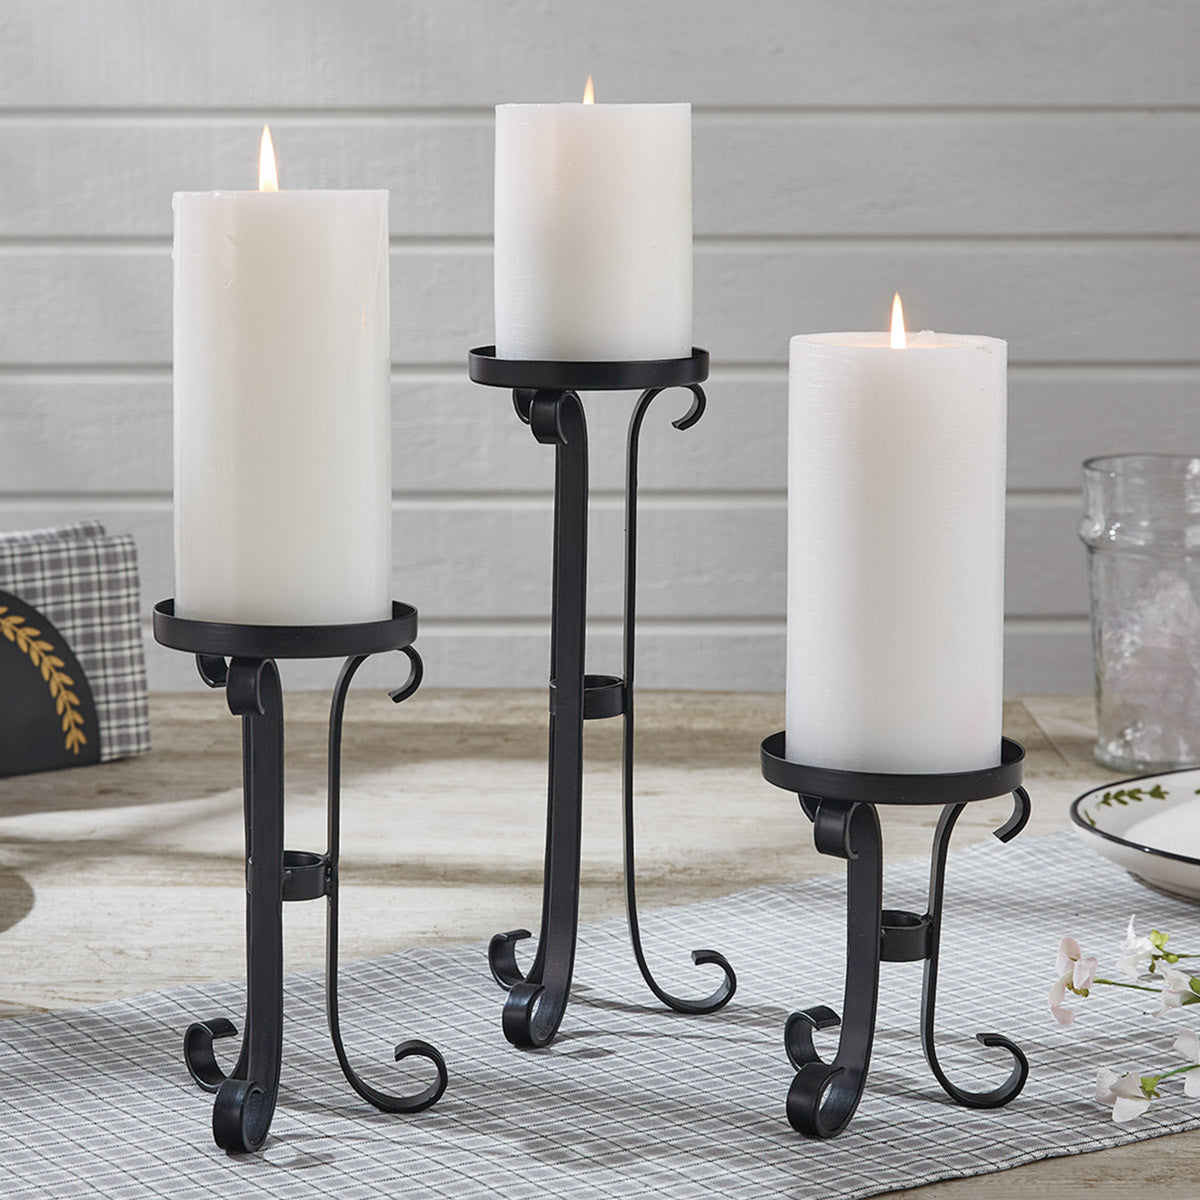 Scrolled Pillar Candle Holders